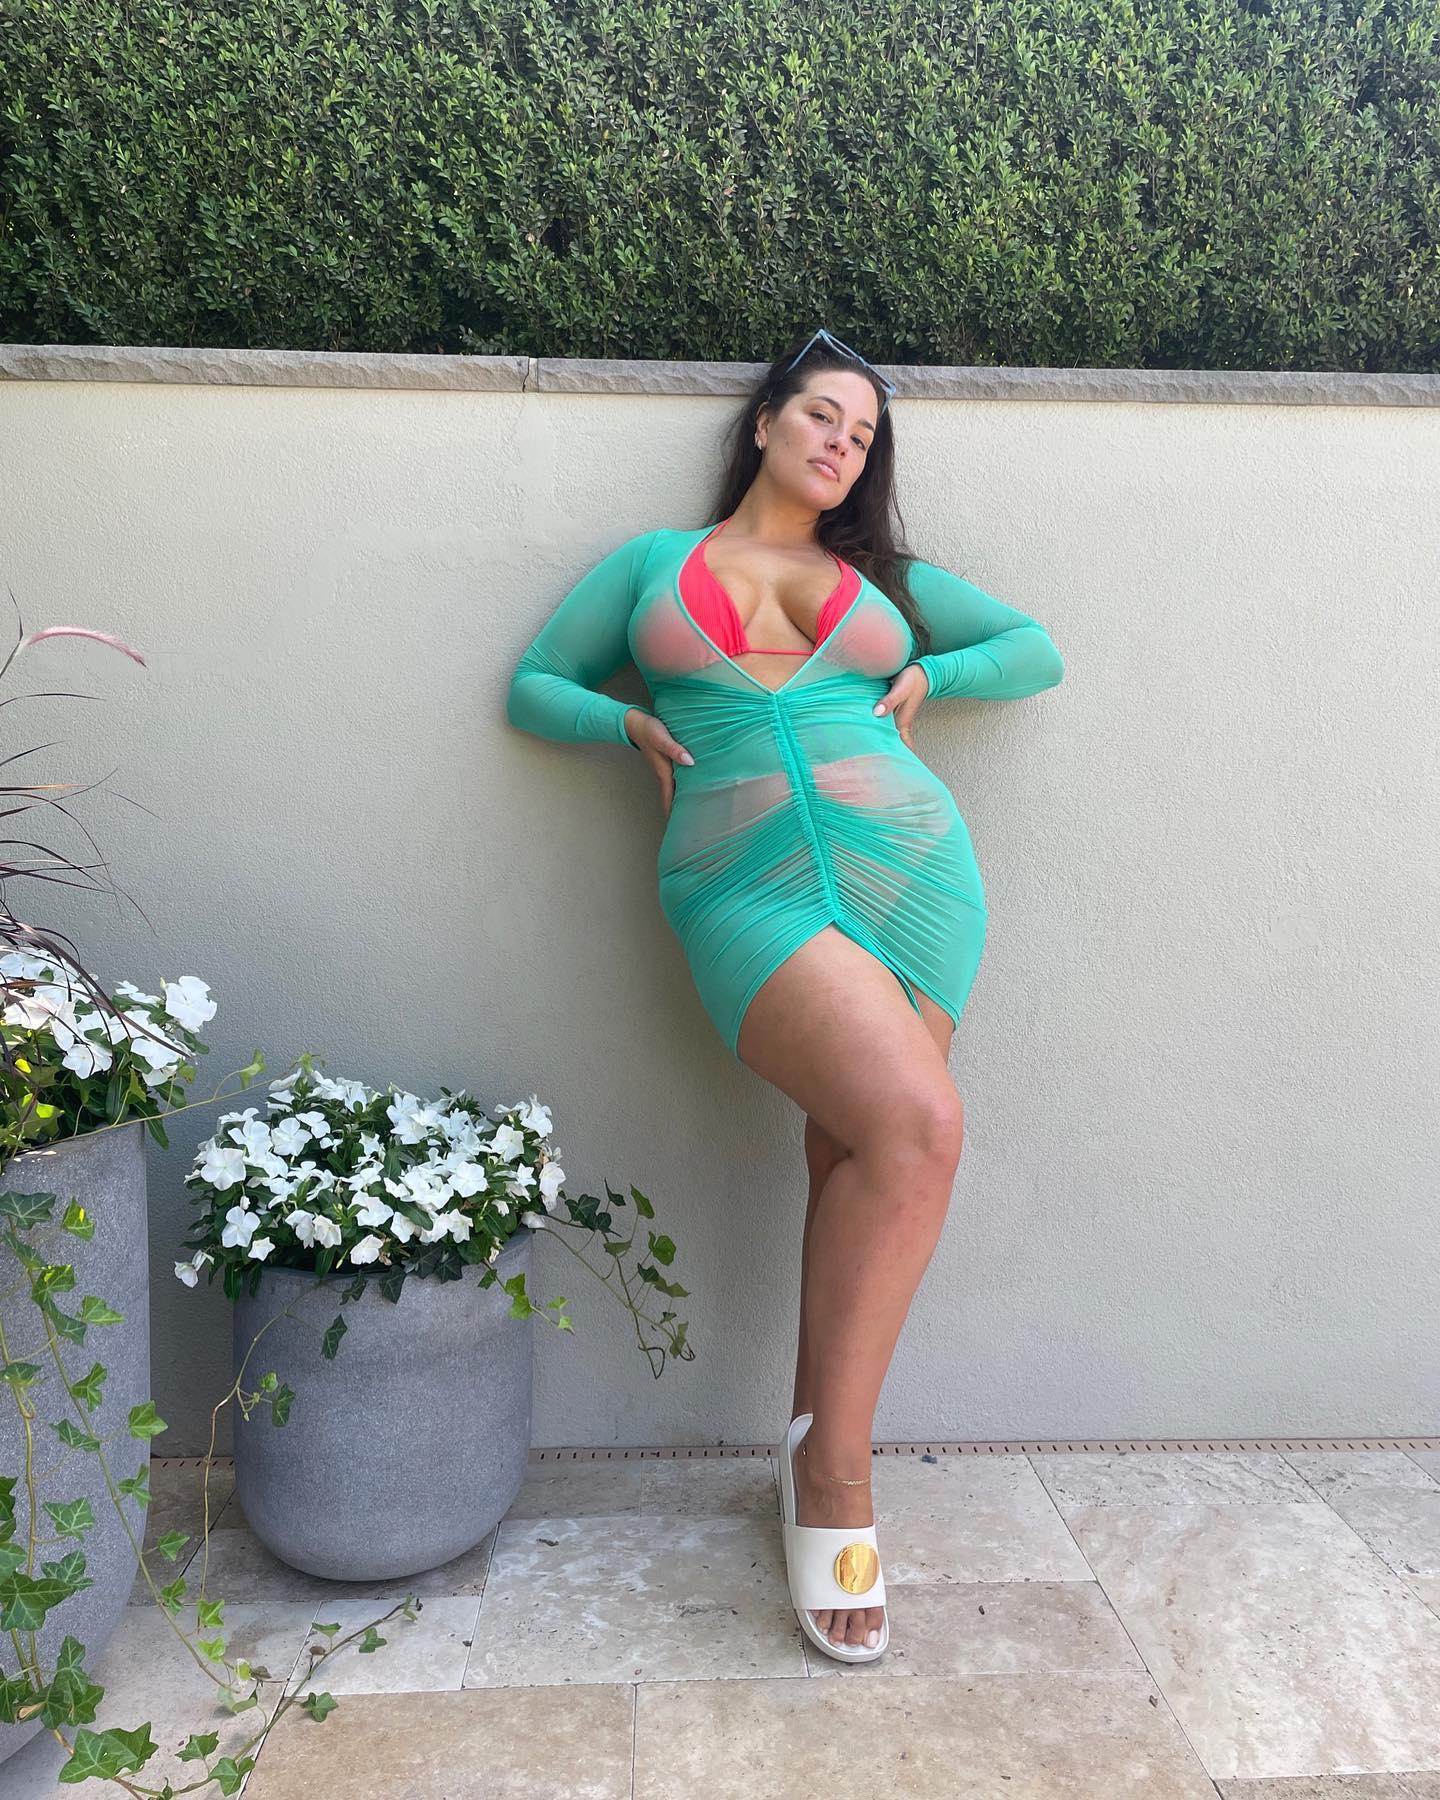 World's Sexiest Woman Ashley Graham flaunts her curves in nothing